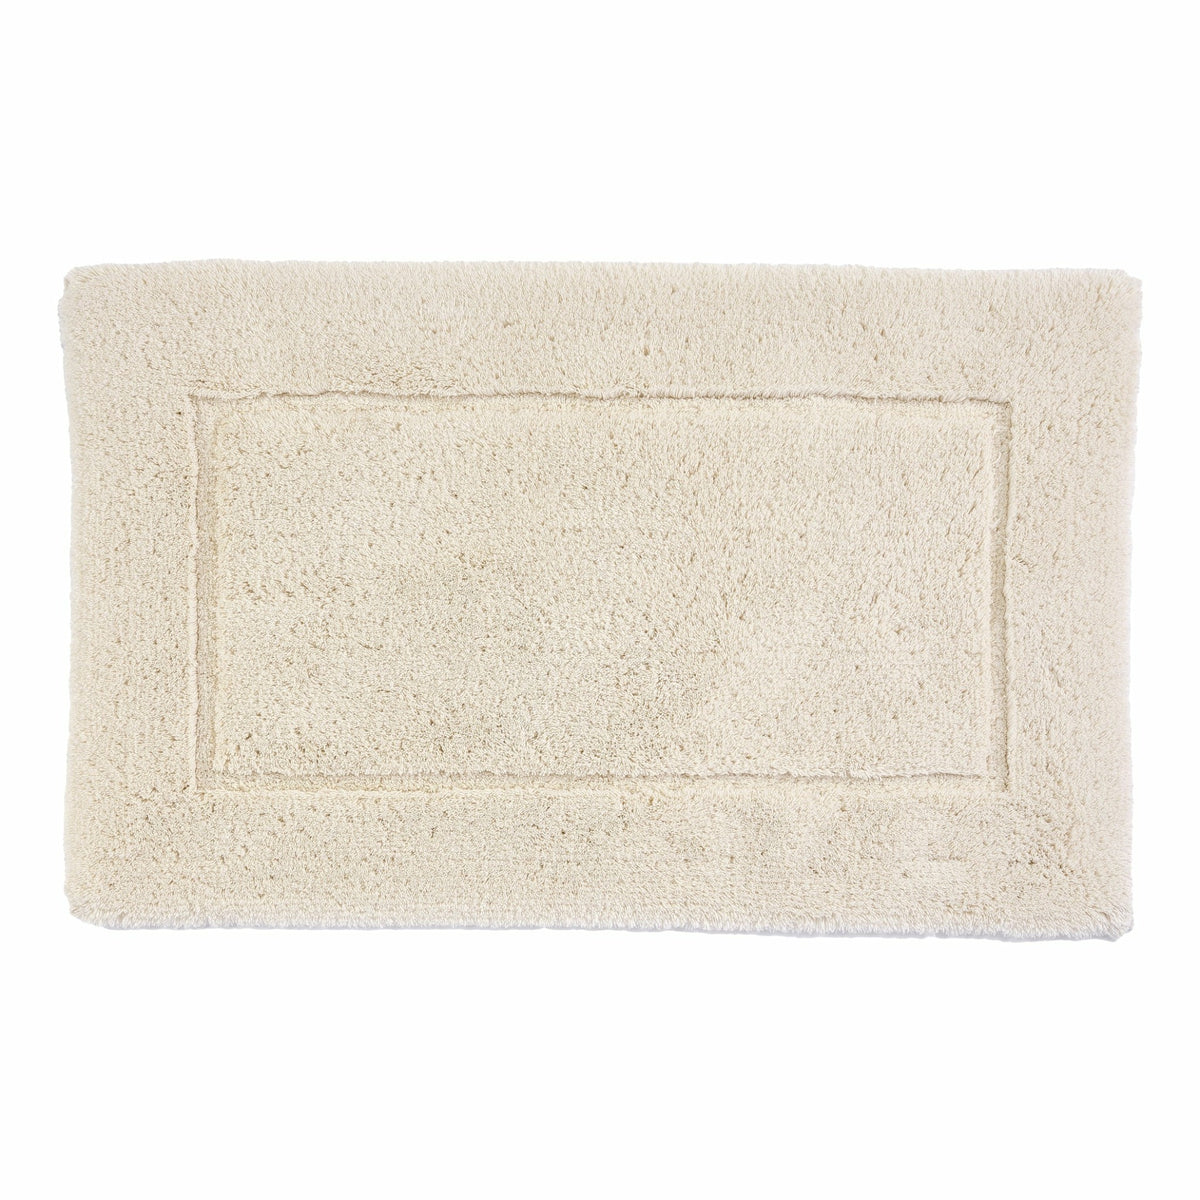 Thick Pile Bath Mat - Natural white/patterned - Home All